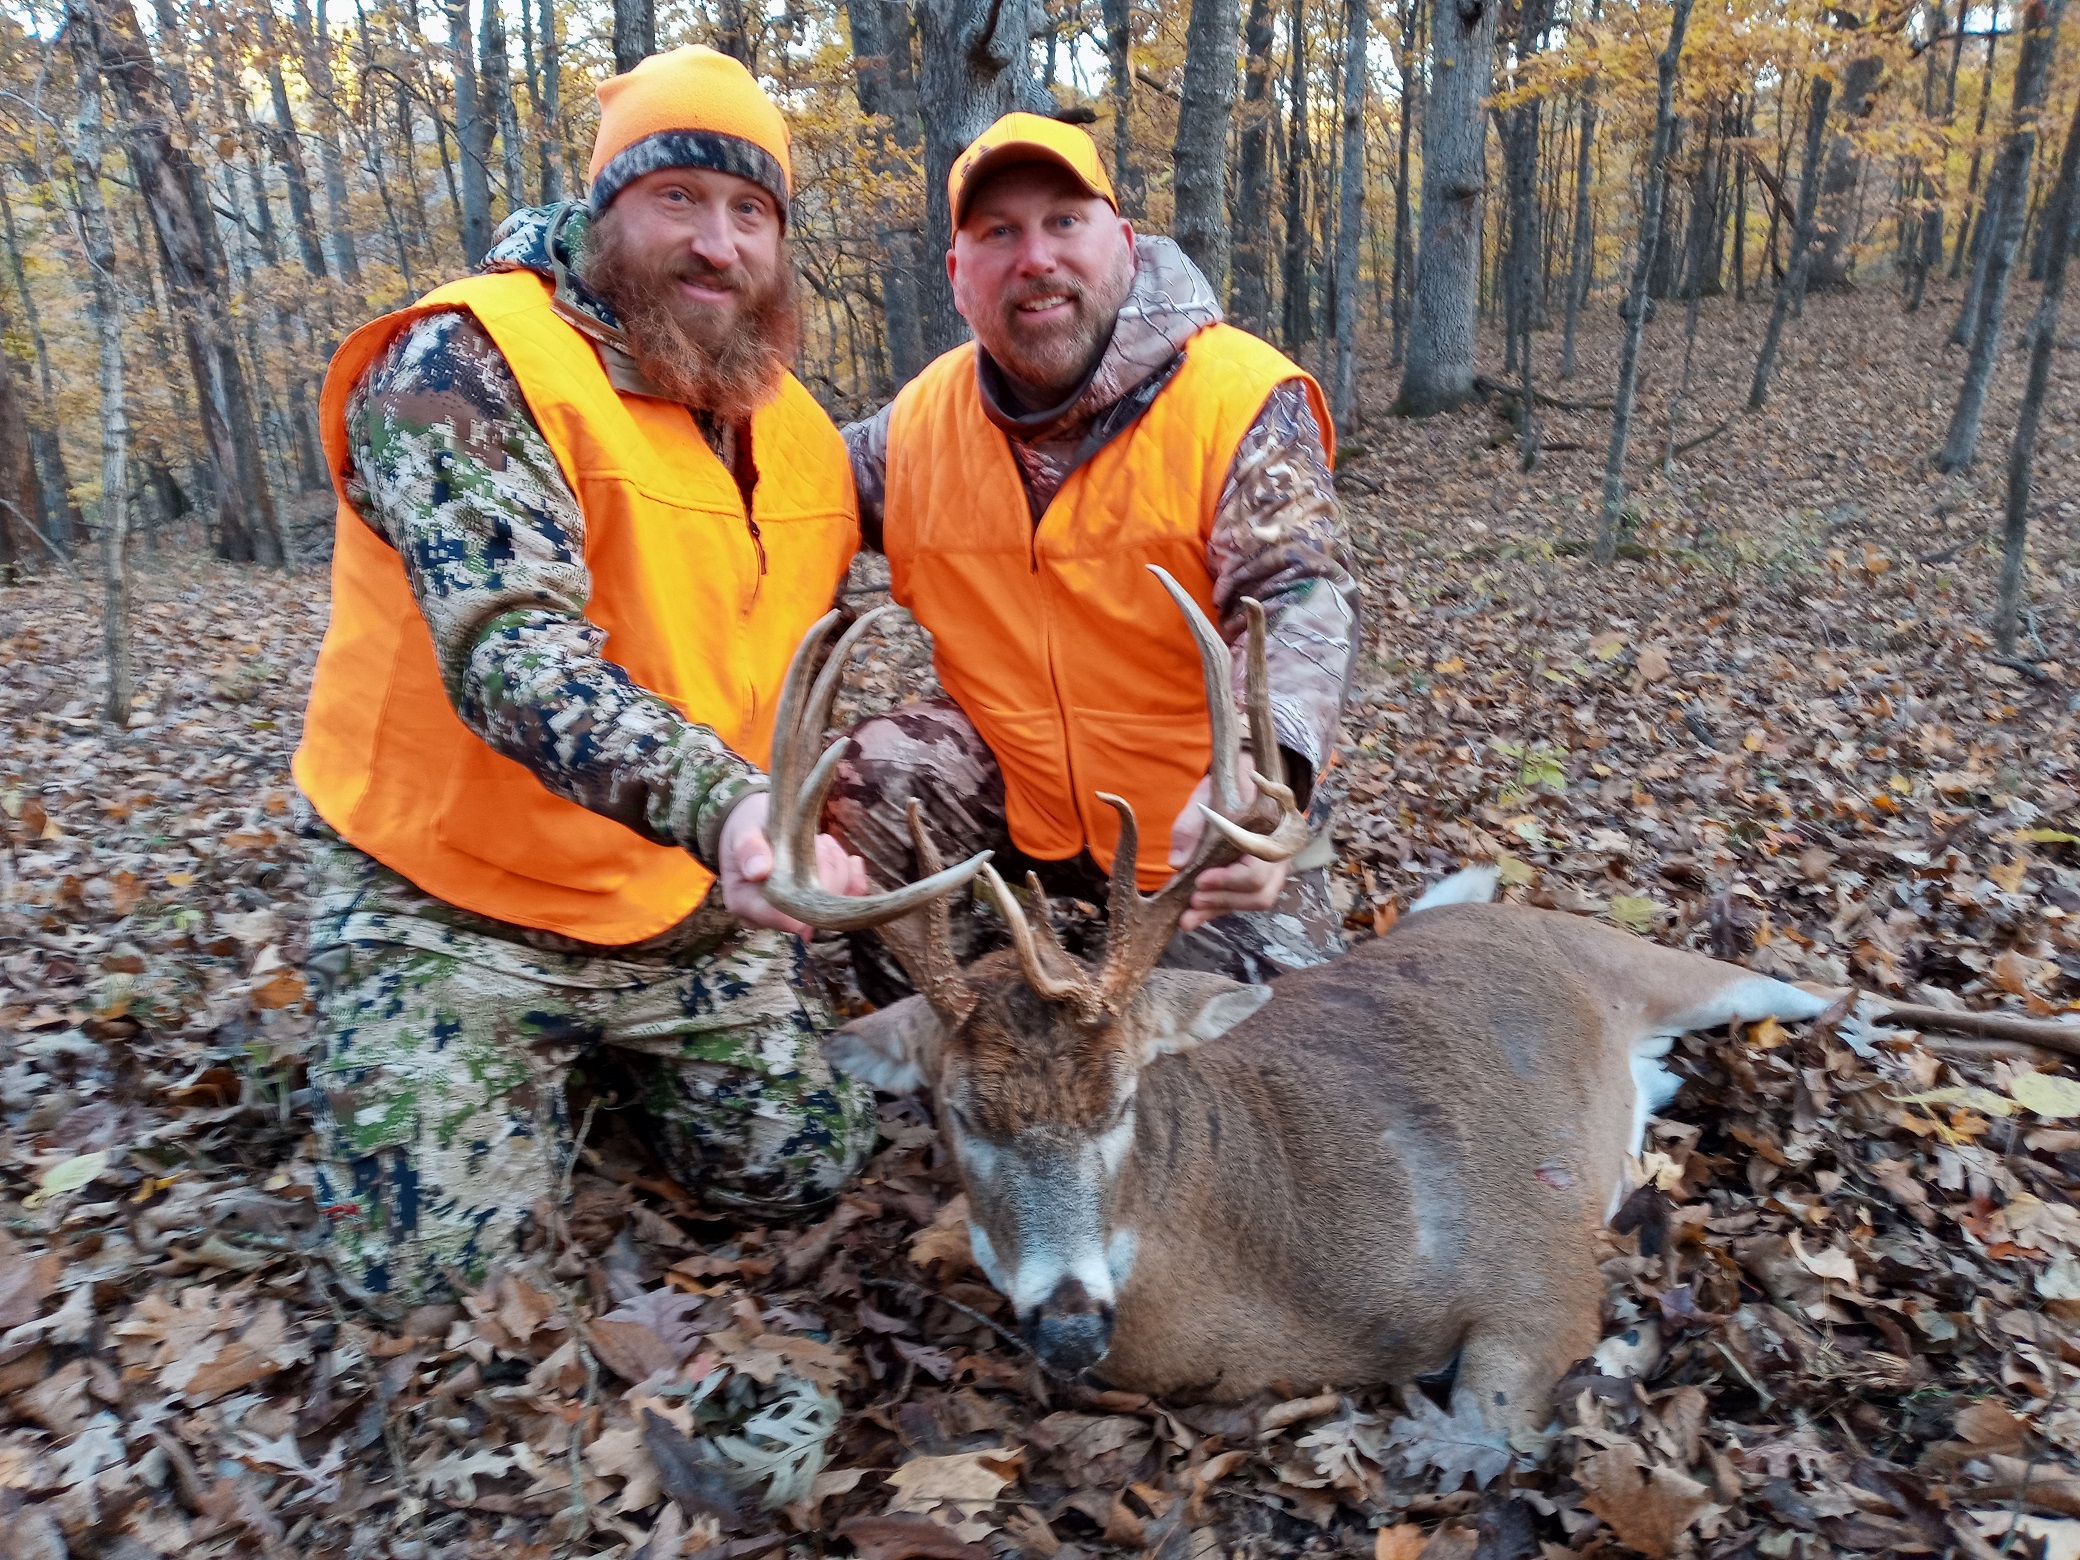 A veteran and a guide in camoflauge and hunter orange pose in the woods with a large buck, the recipient of the Biggest Buck Award for 2021.